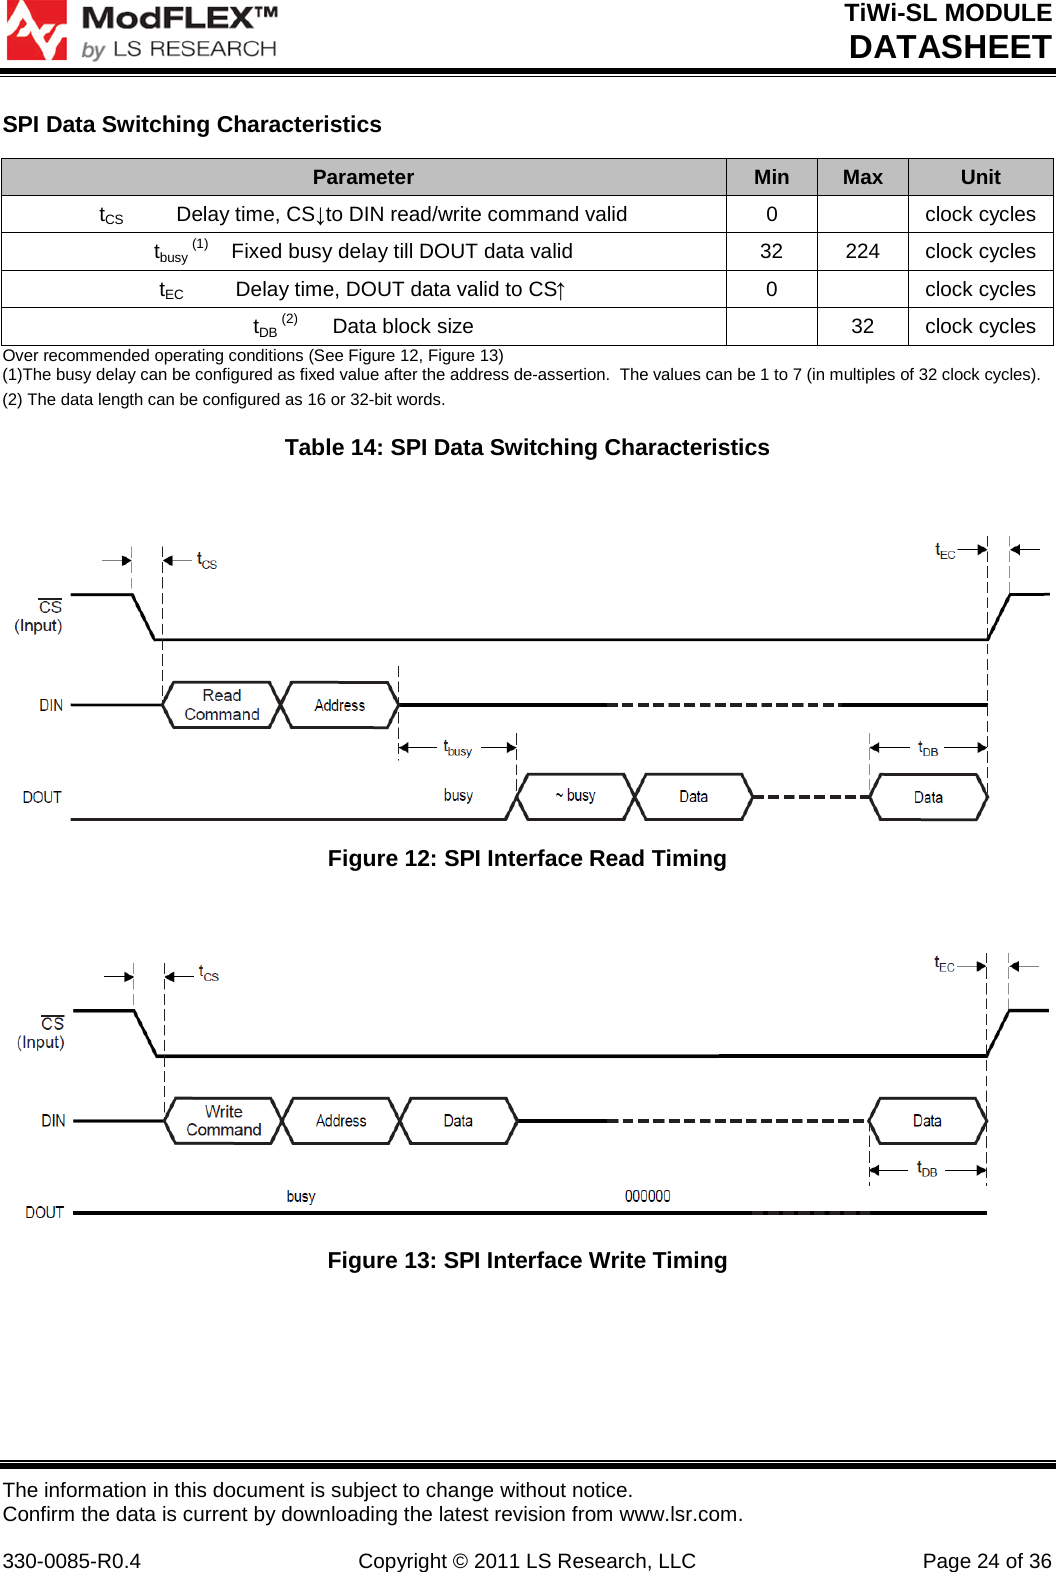 TiWi-SL MODULE DATASHEET The information in this document is subject to change without notice. Confirm the data is current by downloading the latest revision from www.lsr.com.  330-0085-R0.4 Copyright © 2011 LS Research, LLC Page 24 of 36 SPI Data Switching Characteristics Parameter Min Max Unit tCS              Delay time, CS↓to DIN read/write command valid  0    clock cycles tbusy (1)    Fixed busy delay till DOUT data valid 32 224 clock cycles tEC         Delay time, DOUT data valid to CS↑  0    clock cycles tDB (2)      Data block size    32 clock cycles Over recommended operating conditions (See Figure 12, Figure 13) (1)The busy delay can be configured as fixed value after the address de-assertion.  The values can be 1 to 7 (in multiples of 32 clock cycles). (2) The data length can be configured as 16 or 32-bit words. Table 14: SPI Data Switching Characteristics   Figure 12: SPI Interface Read Timing   Figure 13: SPI Interface Write Timing    